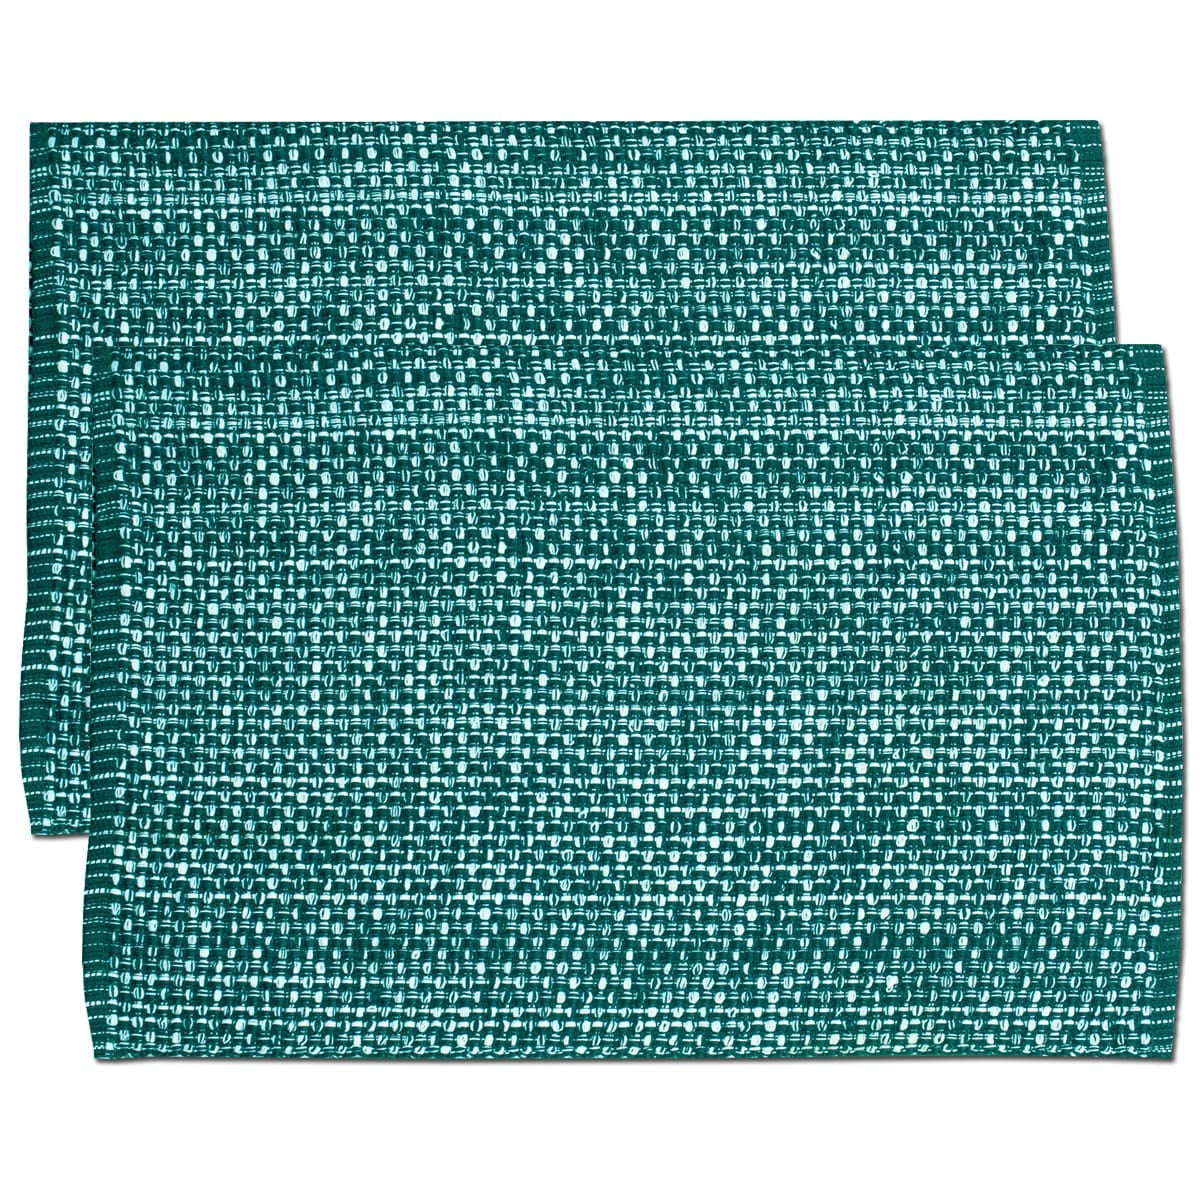 100% Cotton Rib Style Storm Blue Pack of 2 33x45cm 13x18" PLACEMATS 